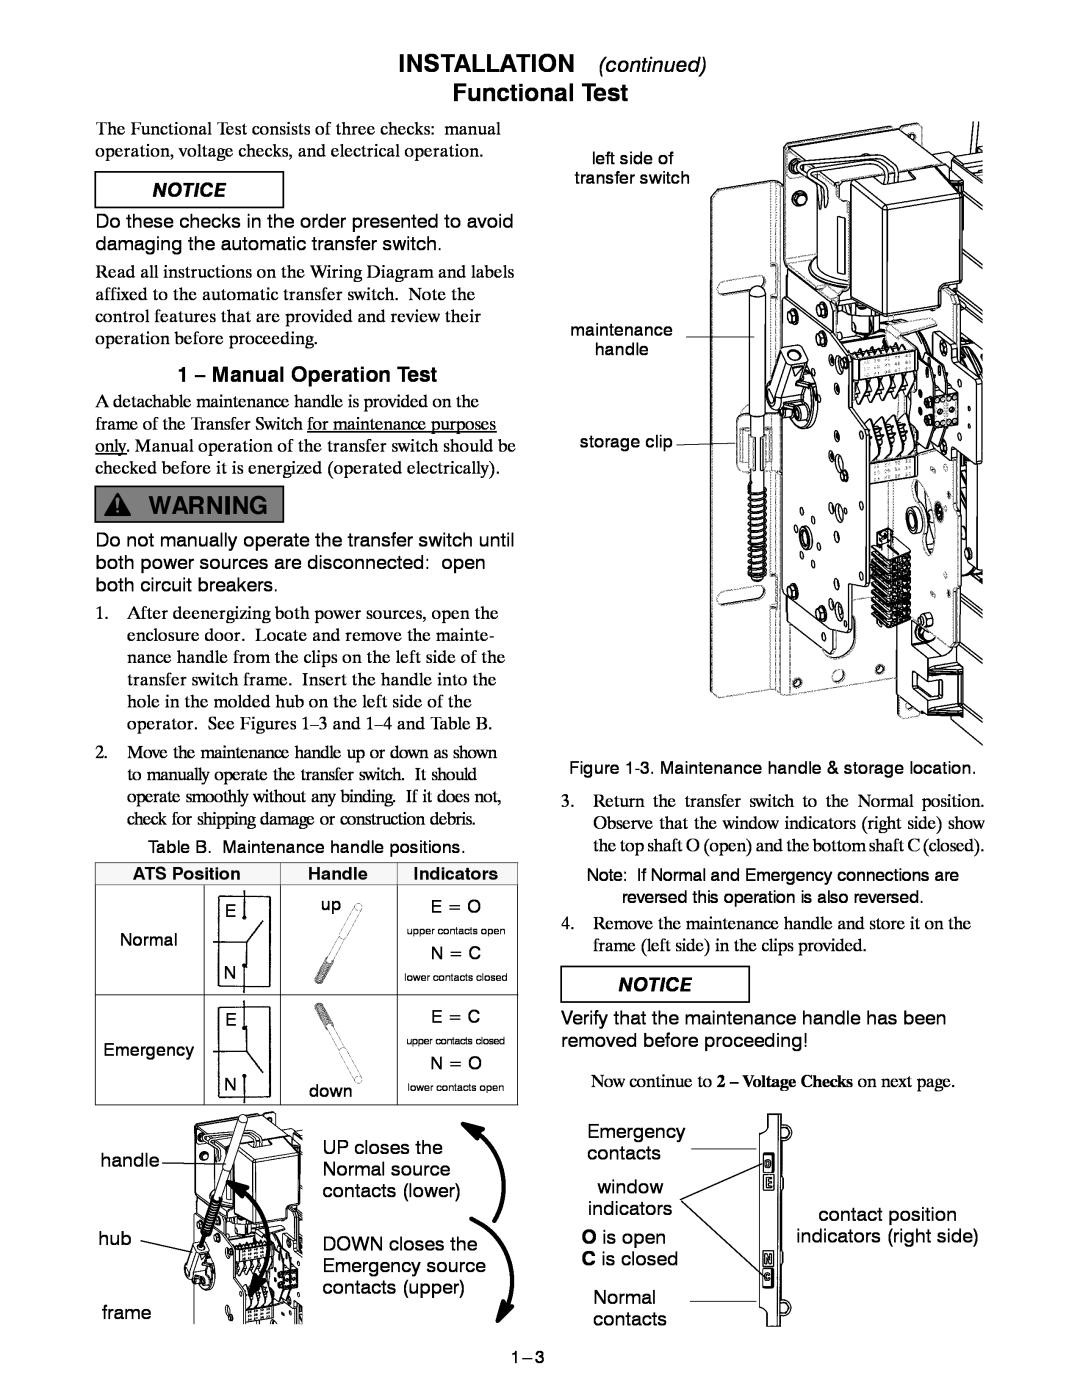 Emerson 300 manual INSTALLATION continued Functional Test, Manual Operation Test 